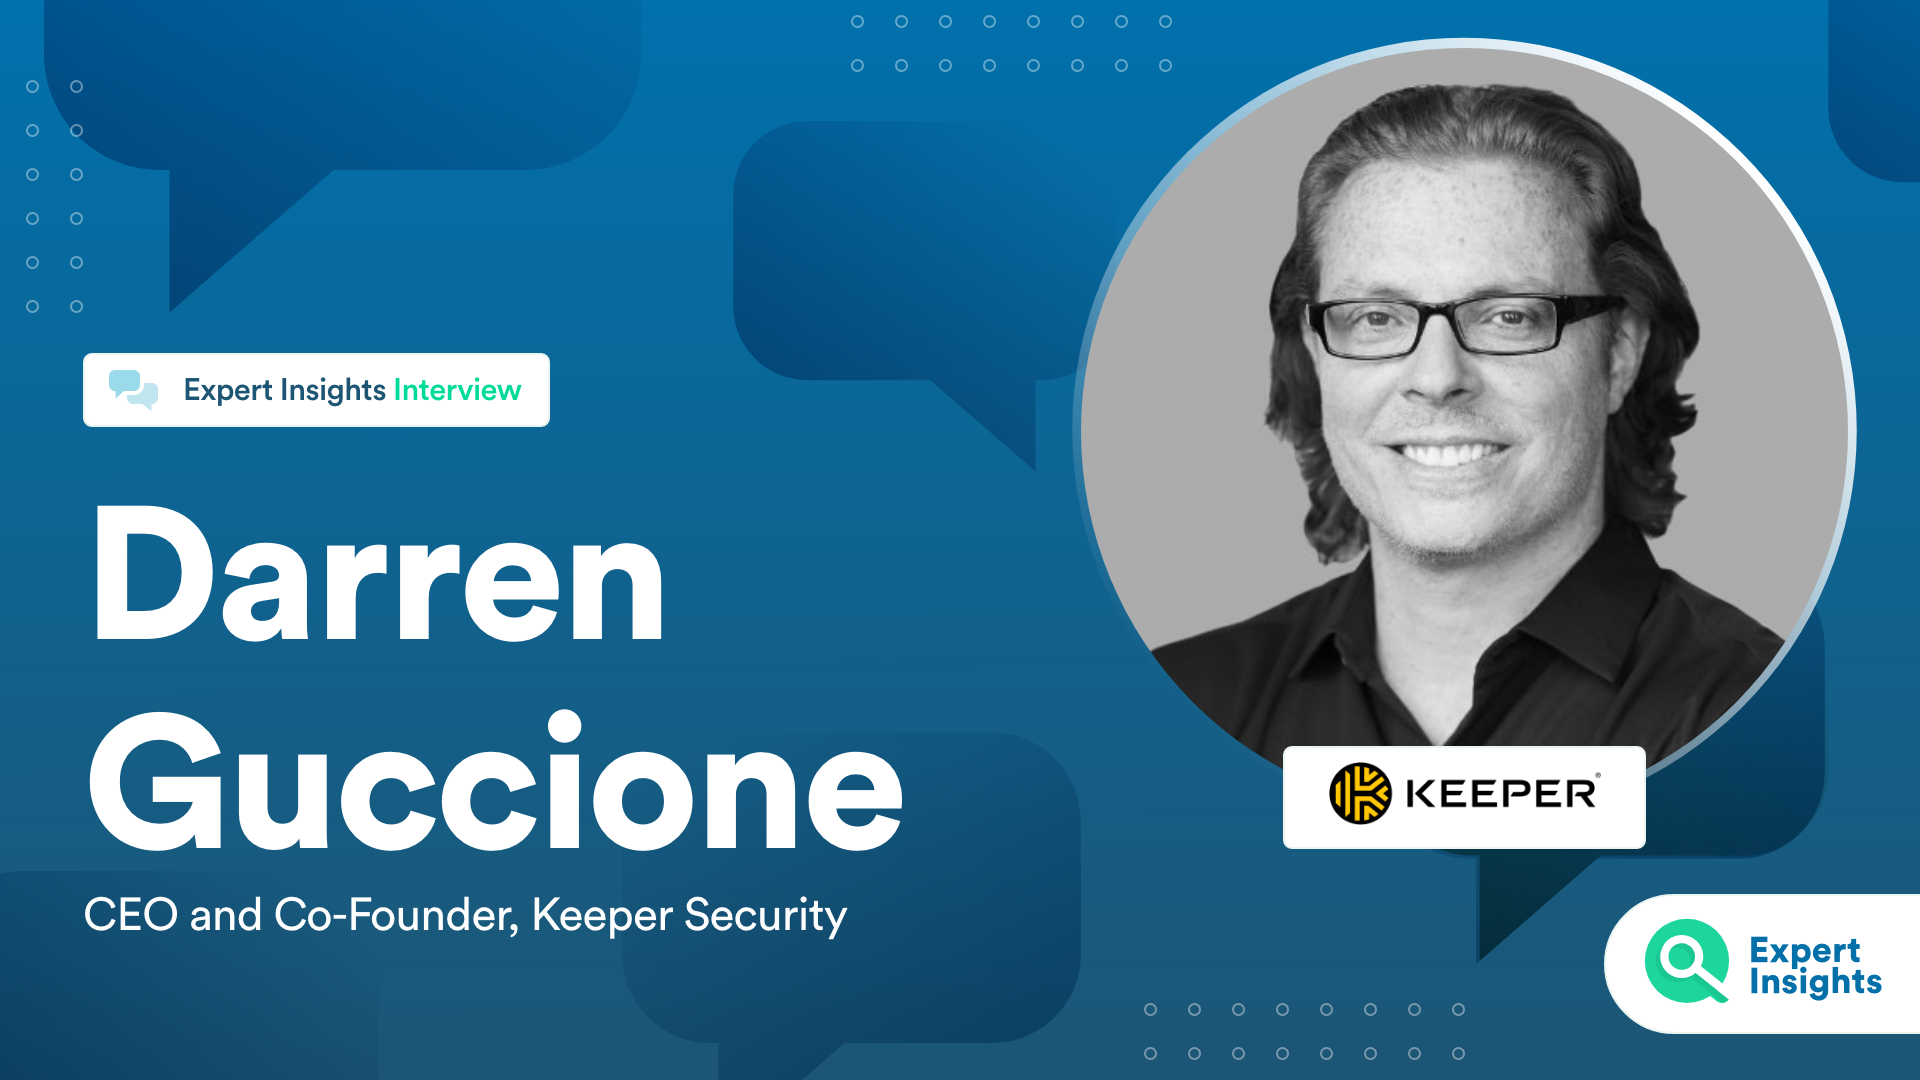 Interview With Darren Guccione Of Keeper Security - Expert Insights